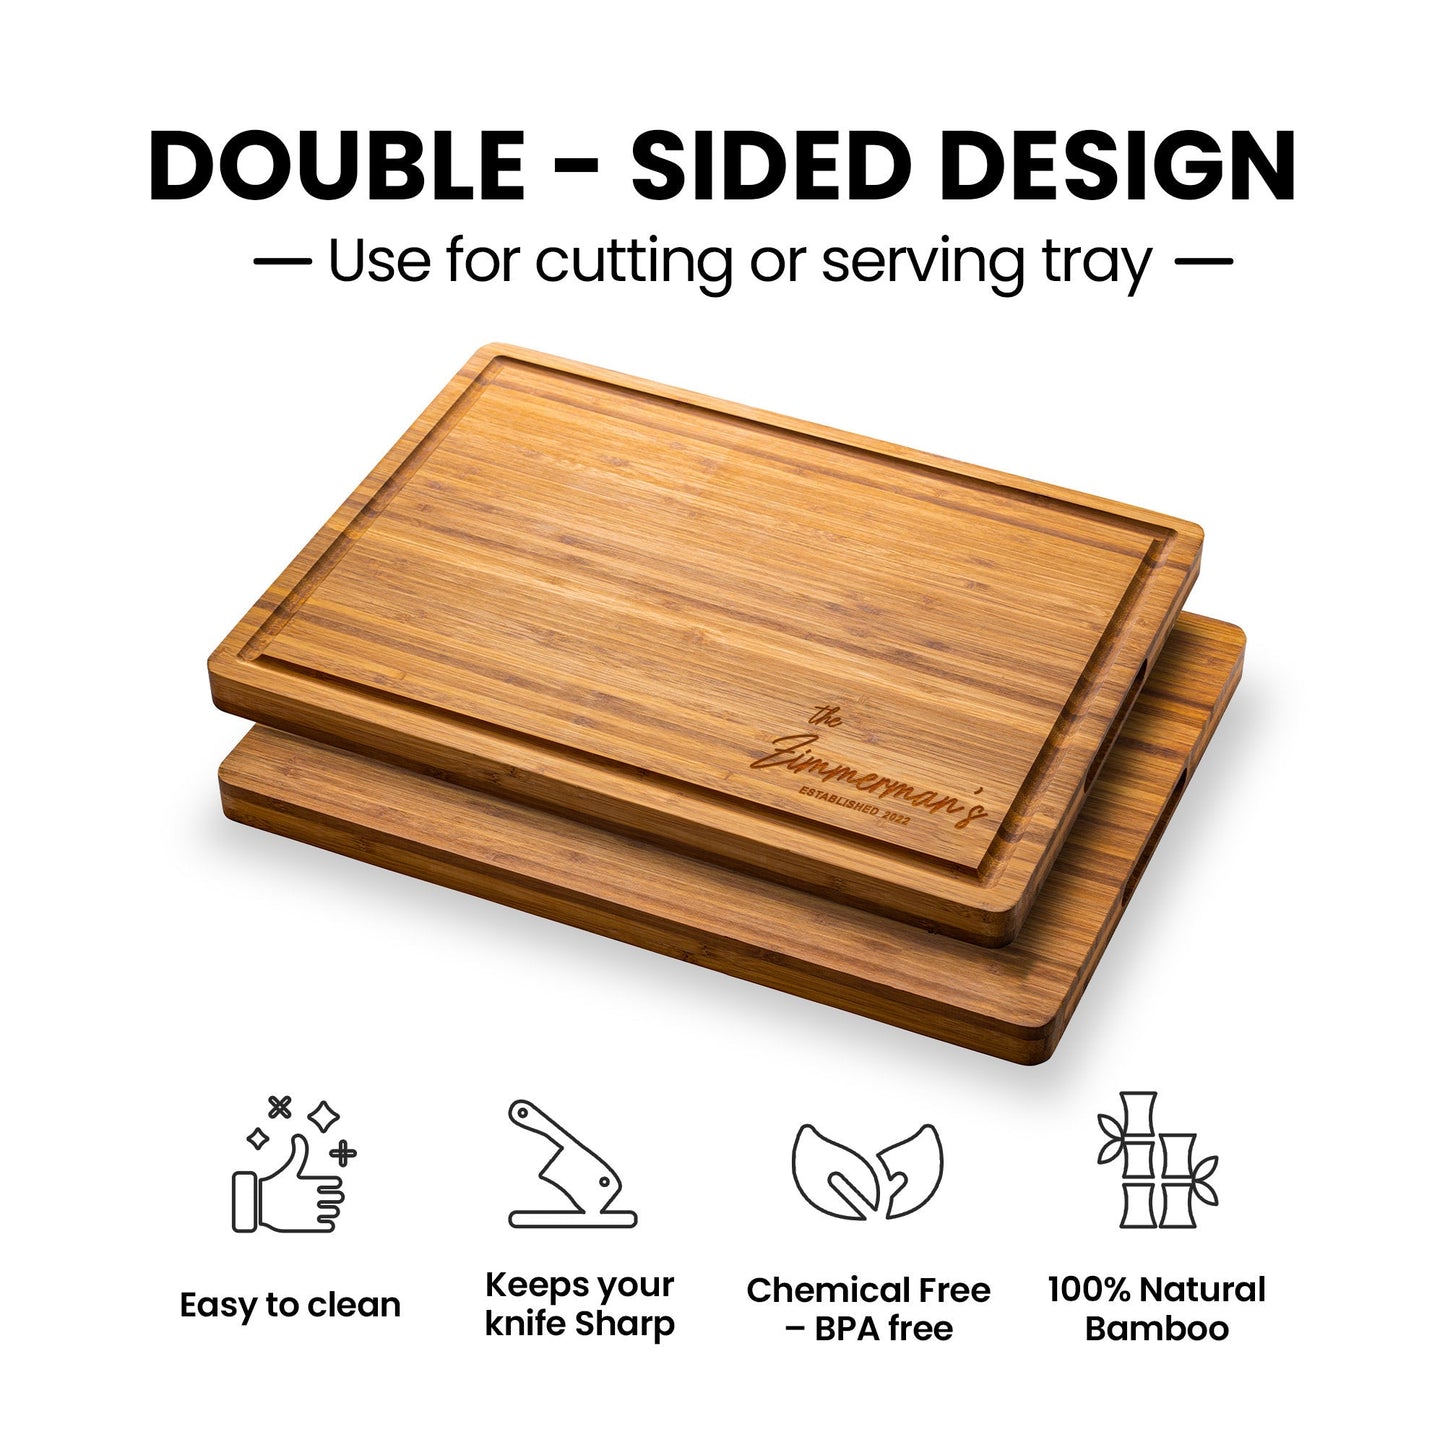 stack-of-bamboo-cutting-boards-with-double-sided-design.